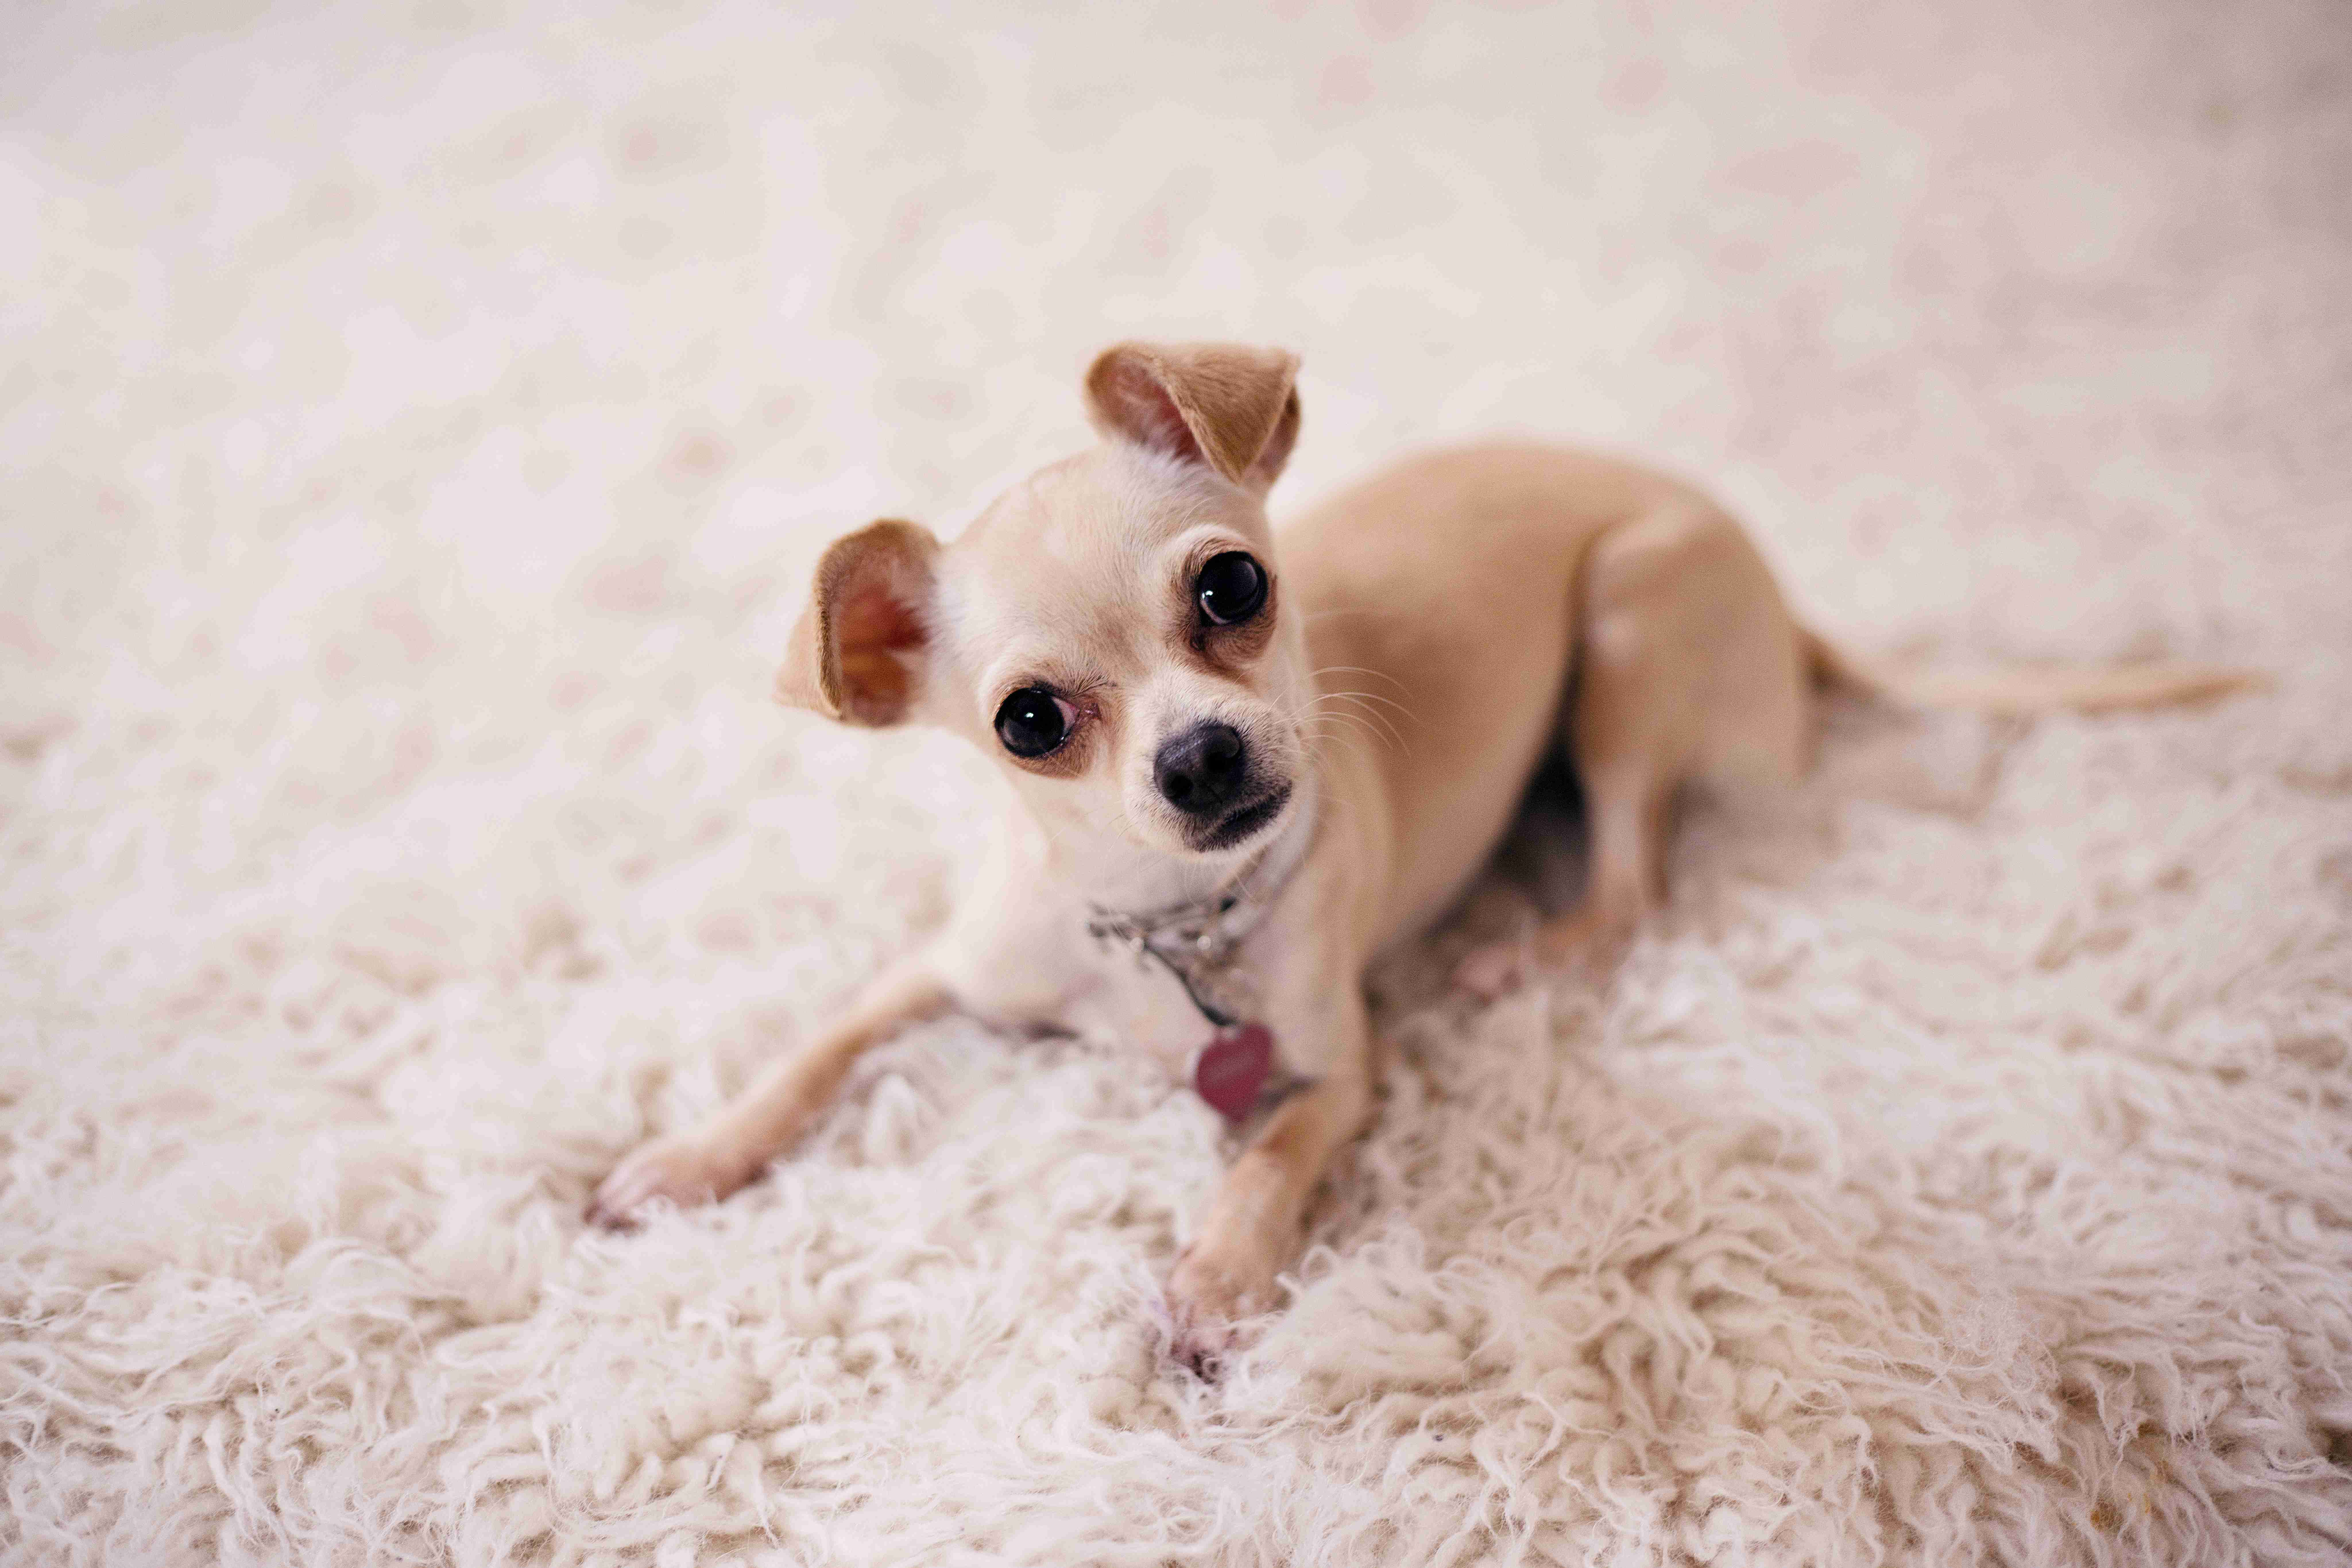 How can you prevent a Chihuahua's anger from escalating into destructive behaviors?